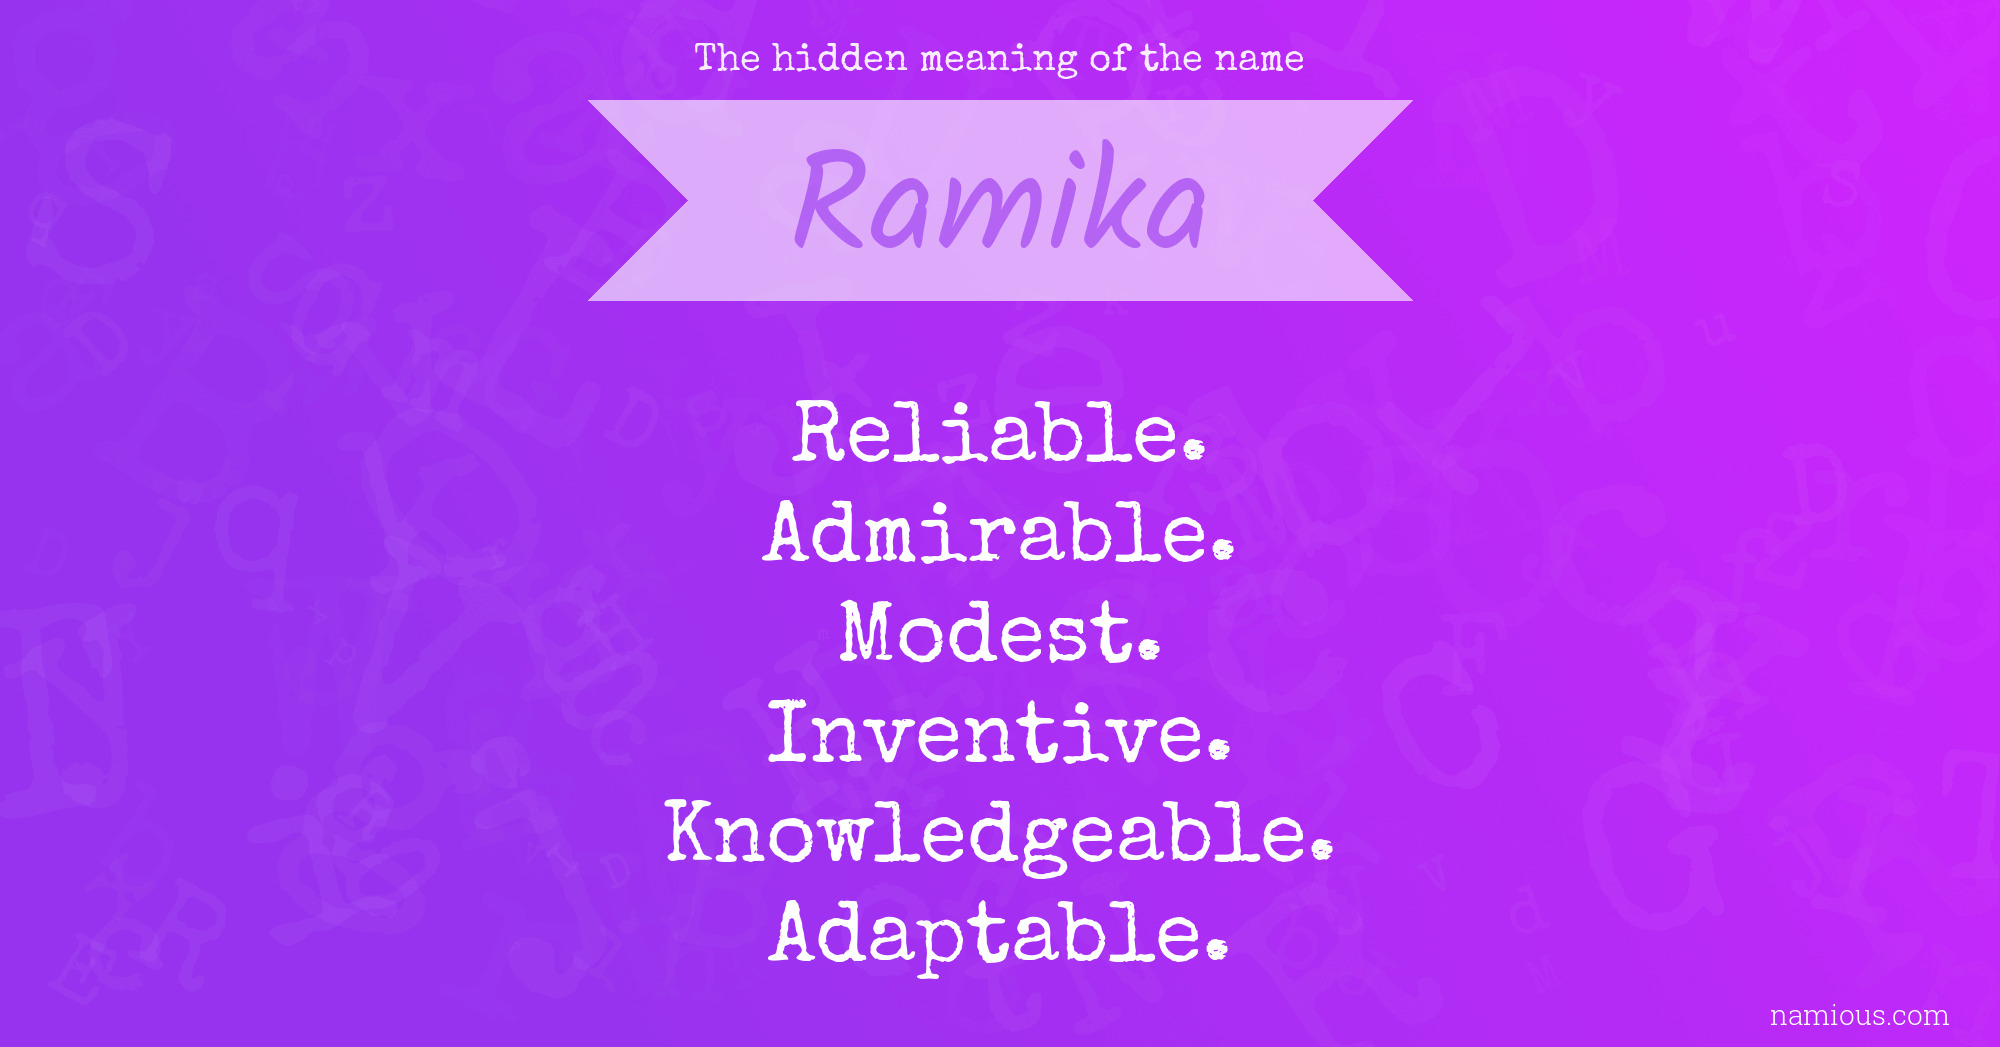 Ramika meaning